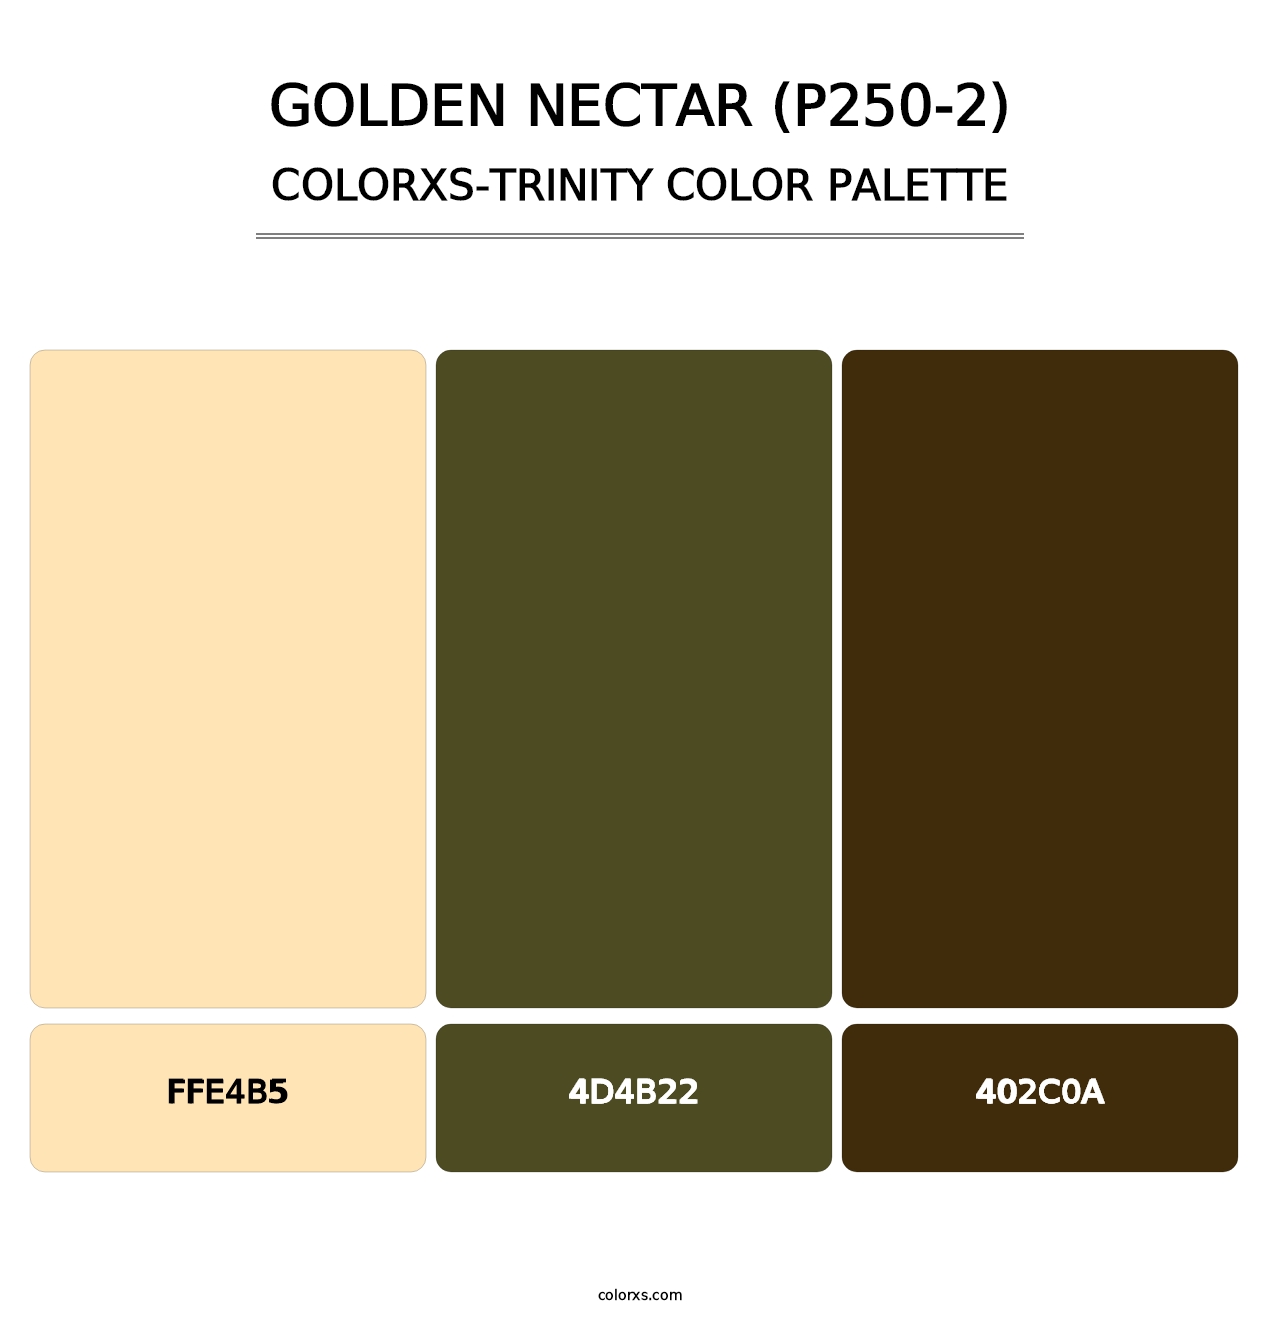 Golden Nectar (P250-2) - Colorxs Trinity Palette